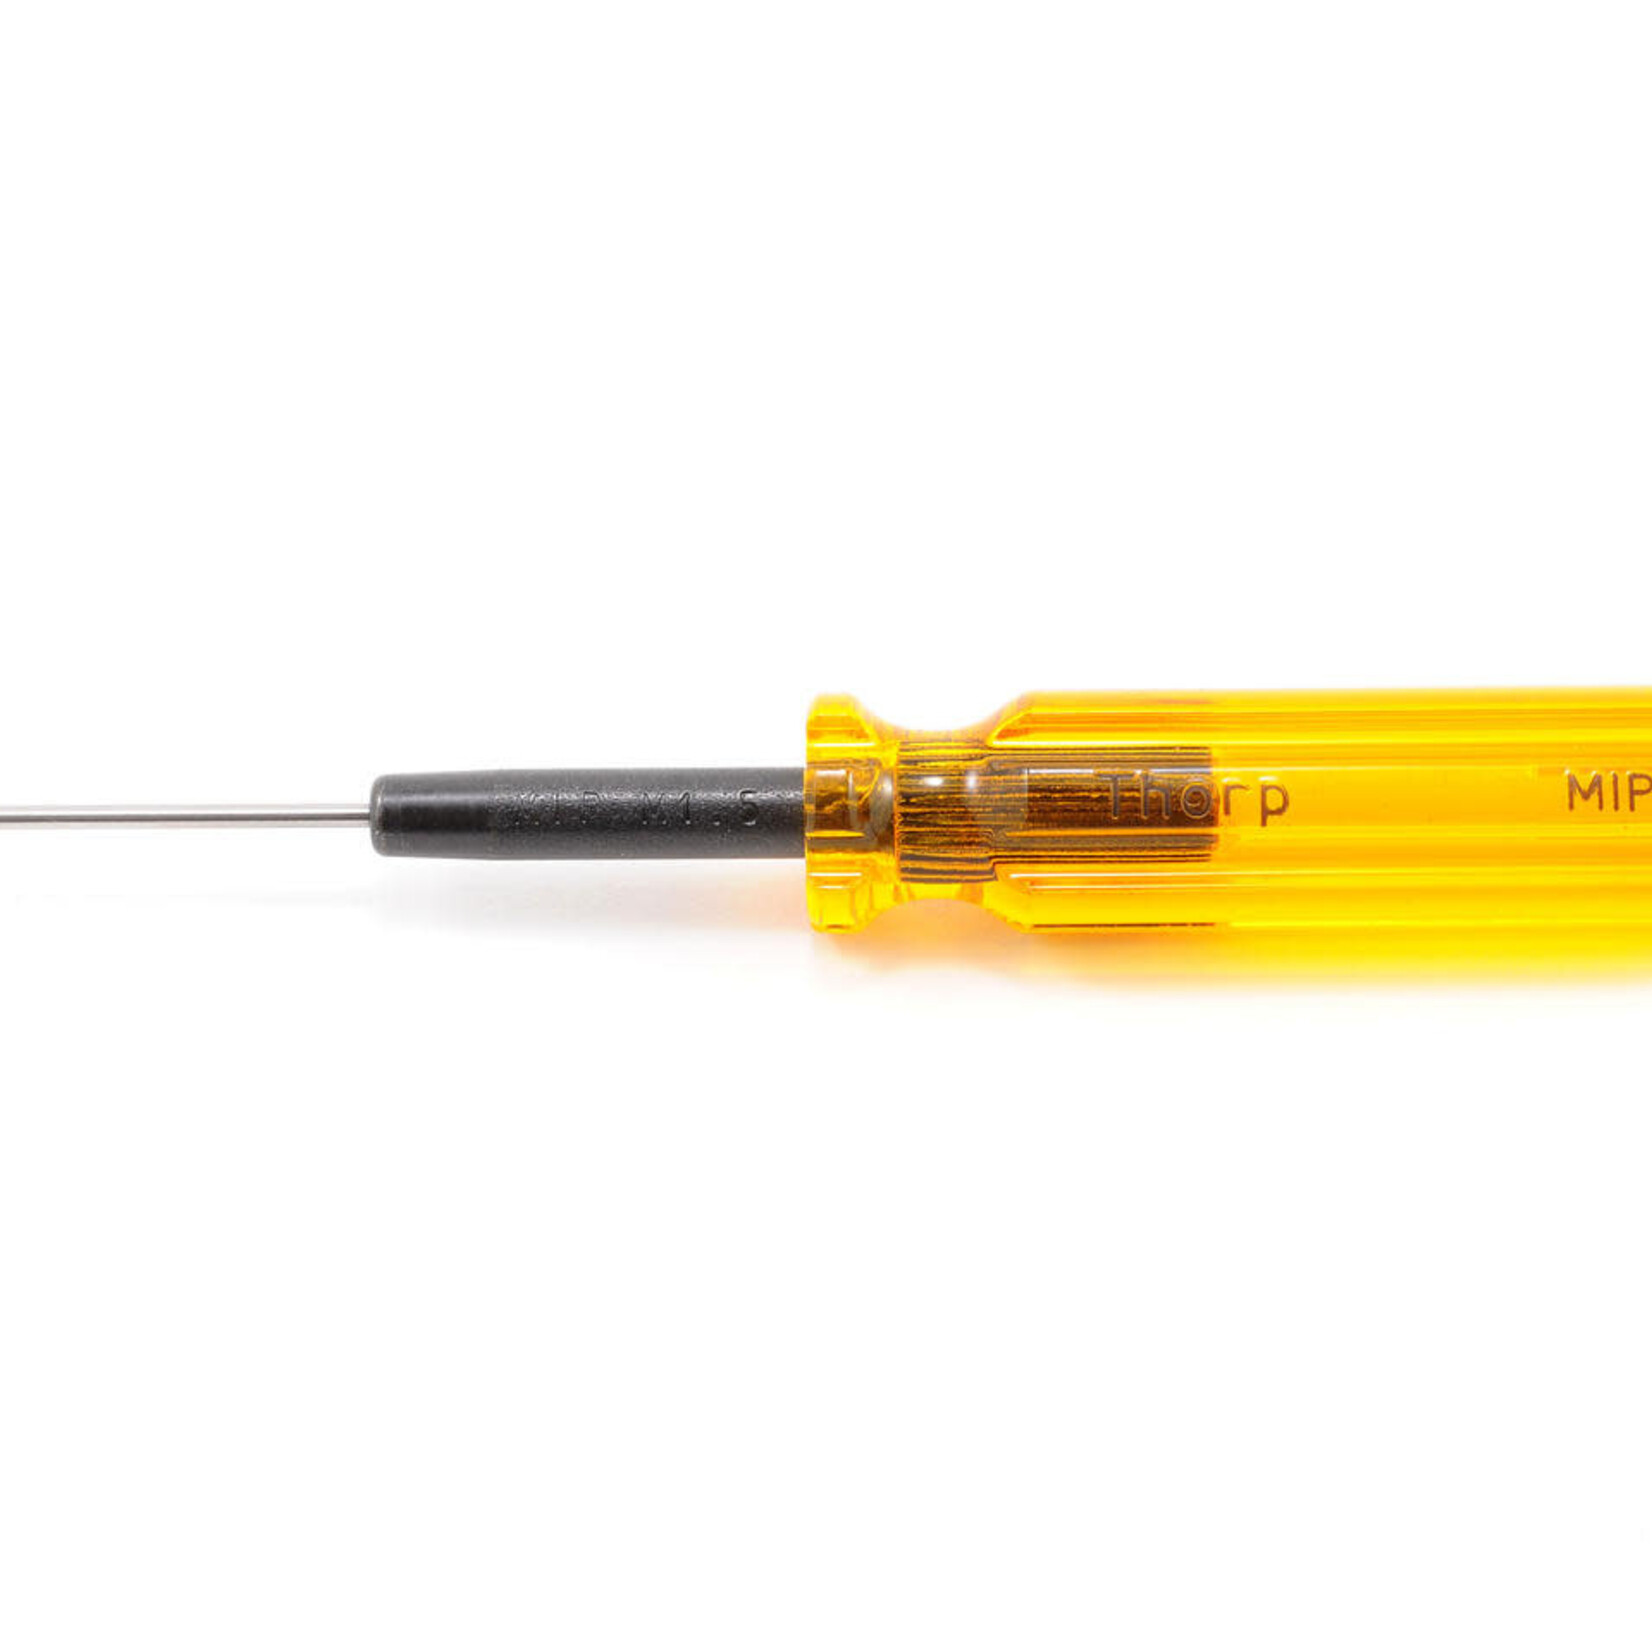 MIP - Moore's Ideal Products MIP 9007 Thorp 1.5mm Hex Driver